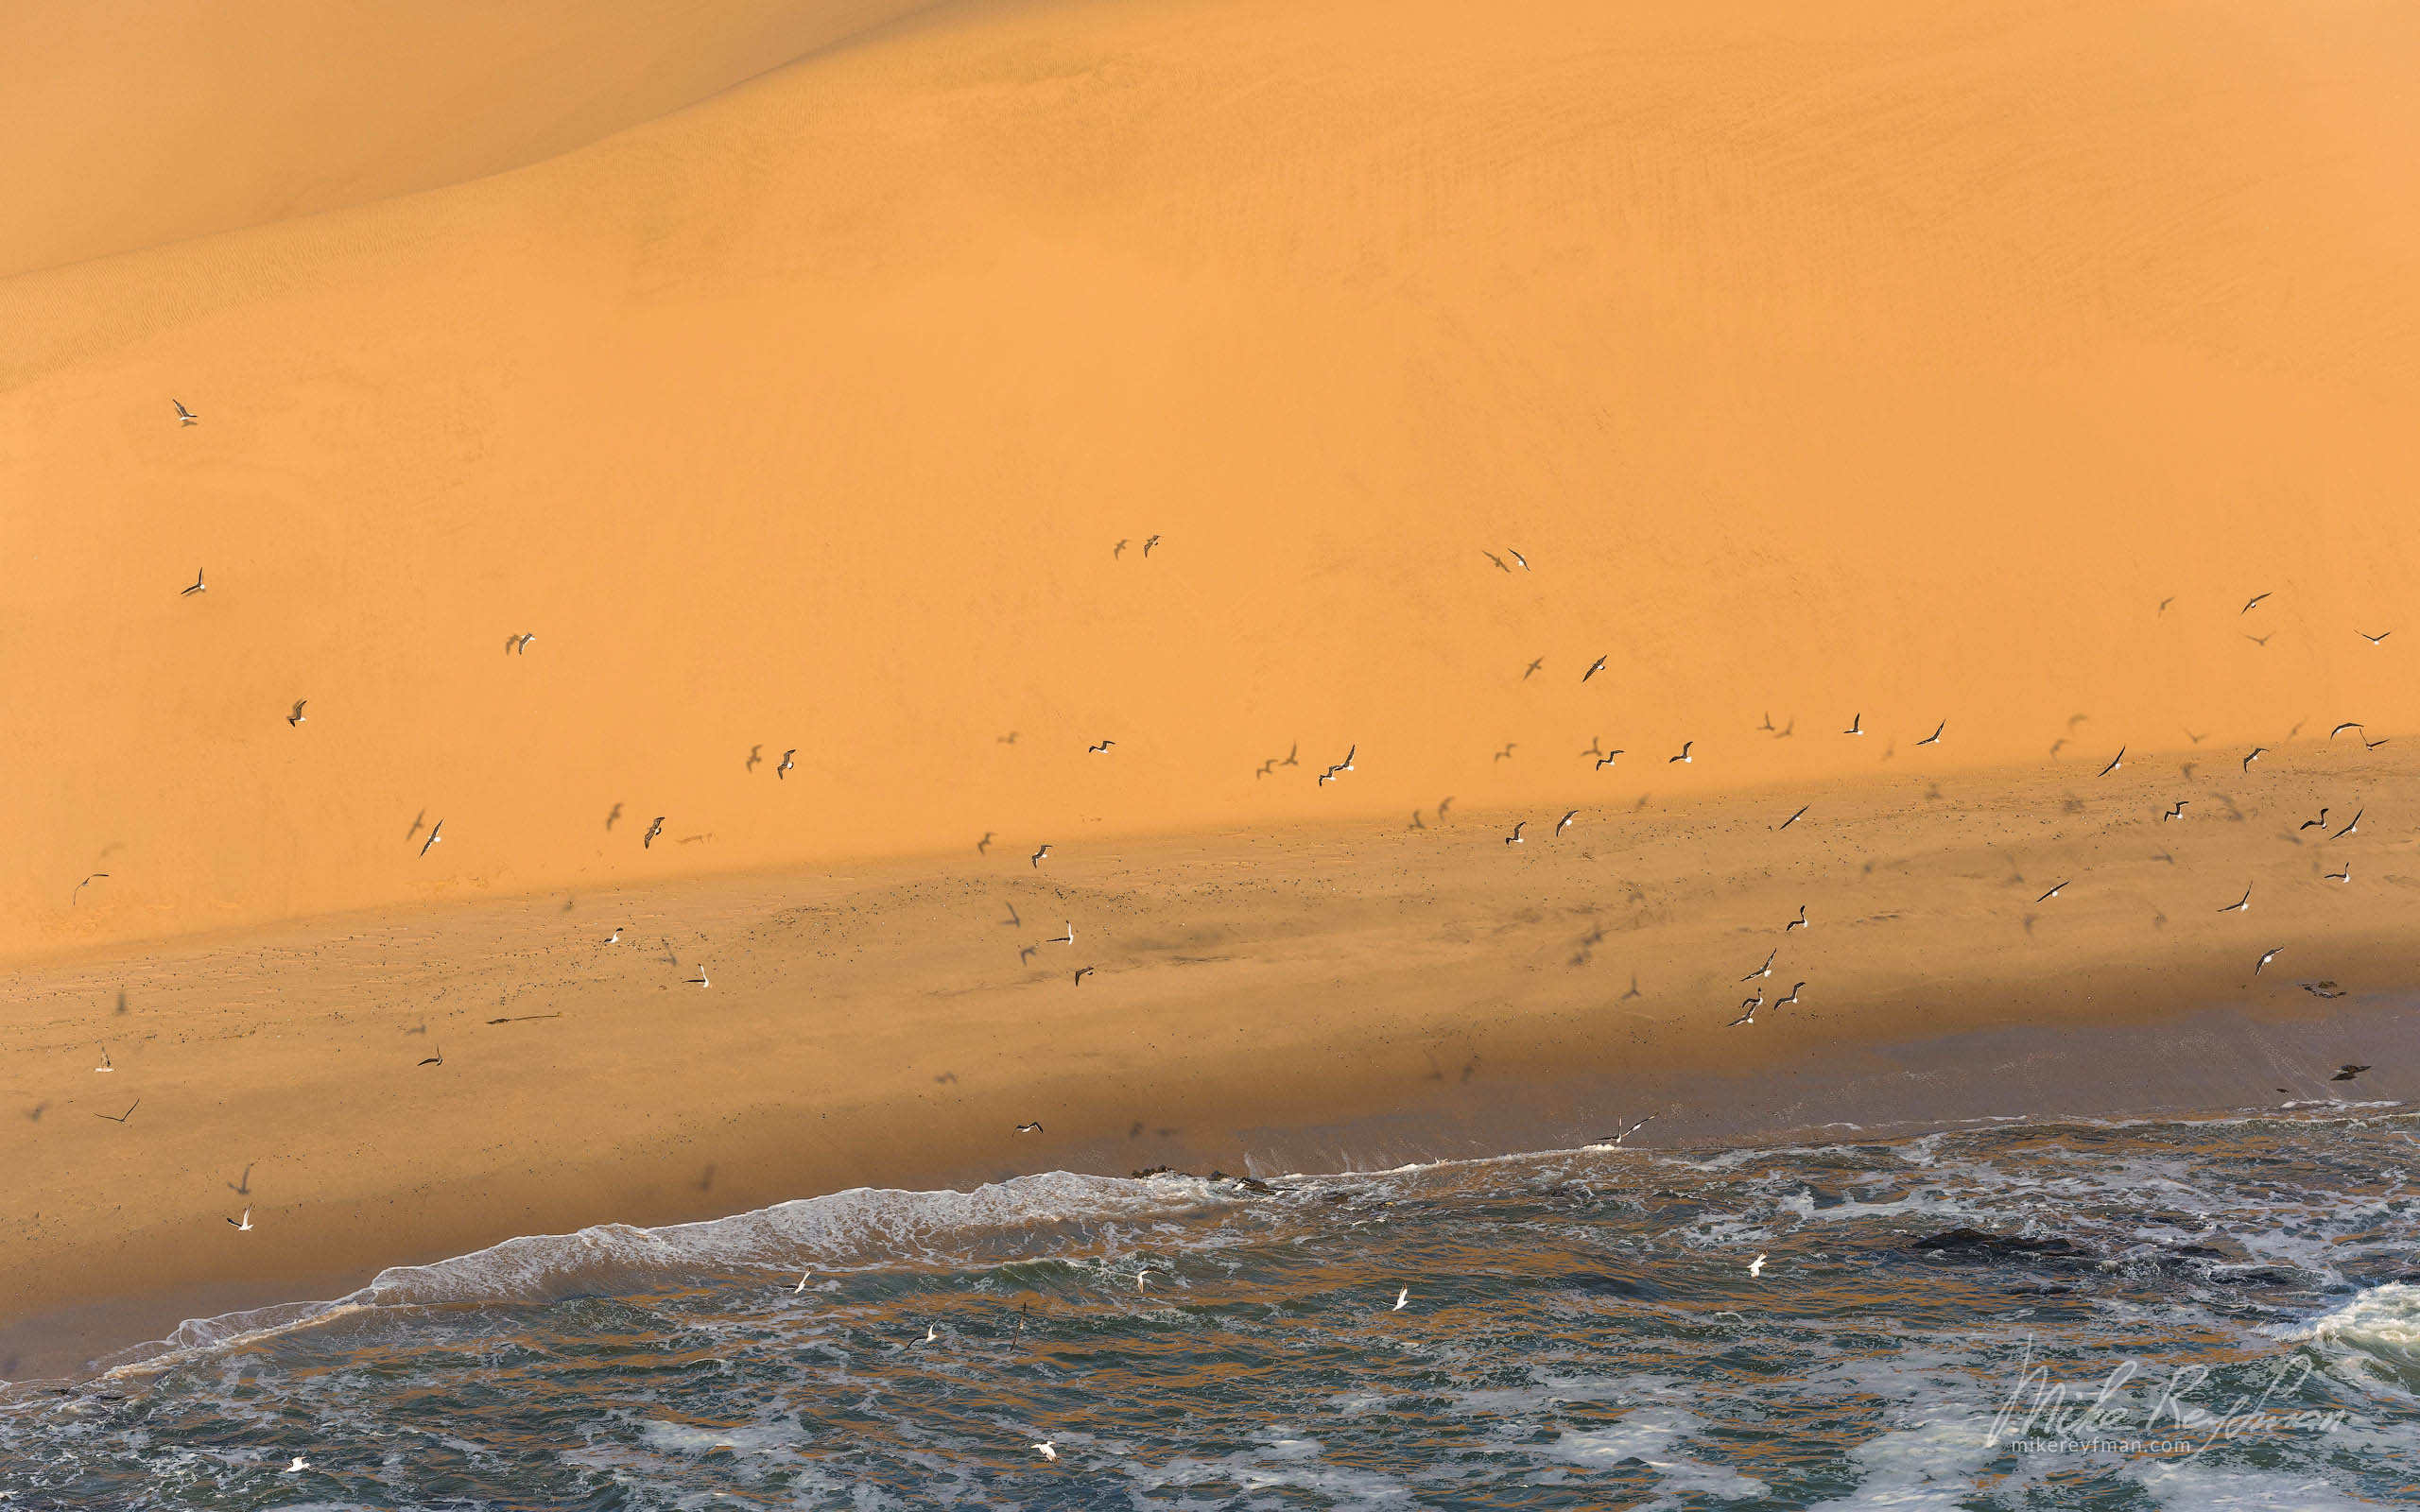 Atlantic Ocean and Sand Dunes. Namib Skeleton Coast National Park, Namibia SCW_027_10N3073 - Shipwrecks and Endless Dunes of Namib Skeleton Coast NP, Dense ocean fogs of the Benguela Current, Cape Fur seals, and Walvis Bay Salt Works. Namibia.  - Mike Reyfman Photography